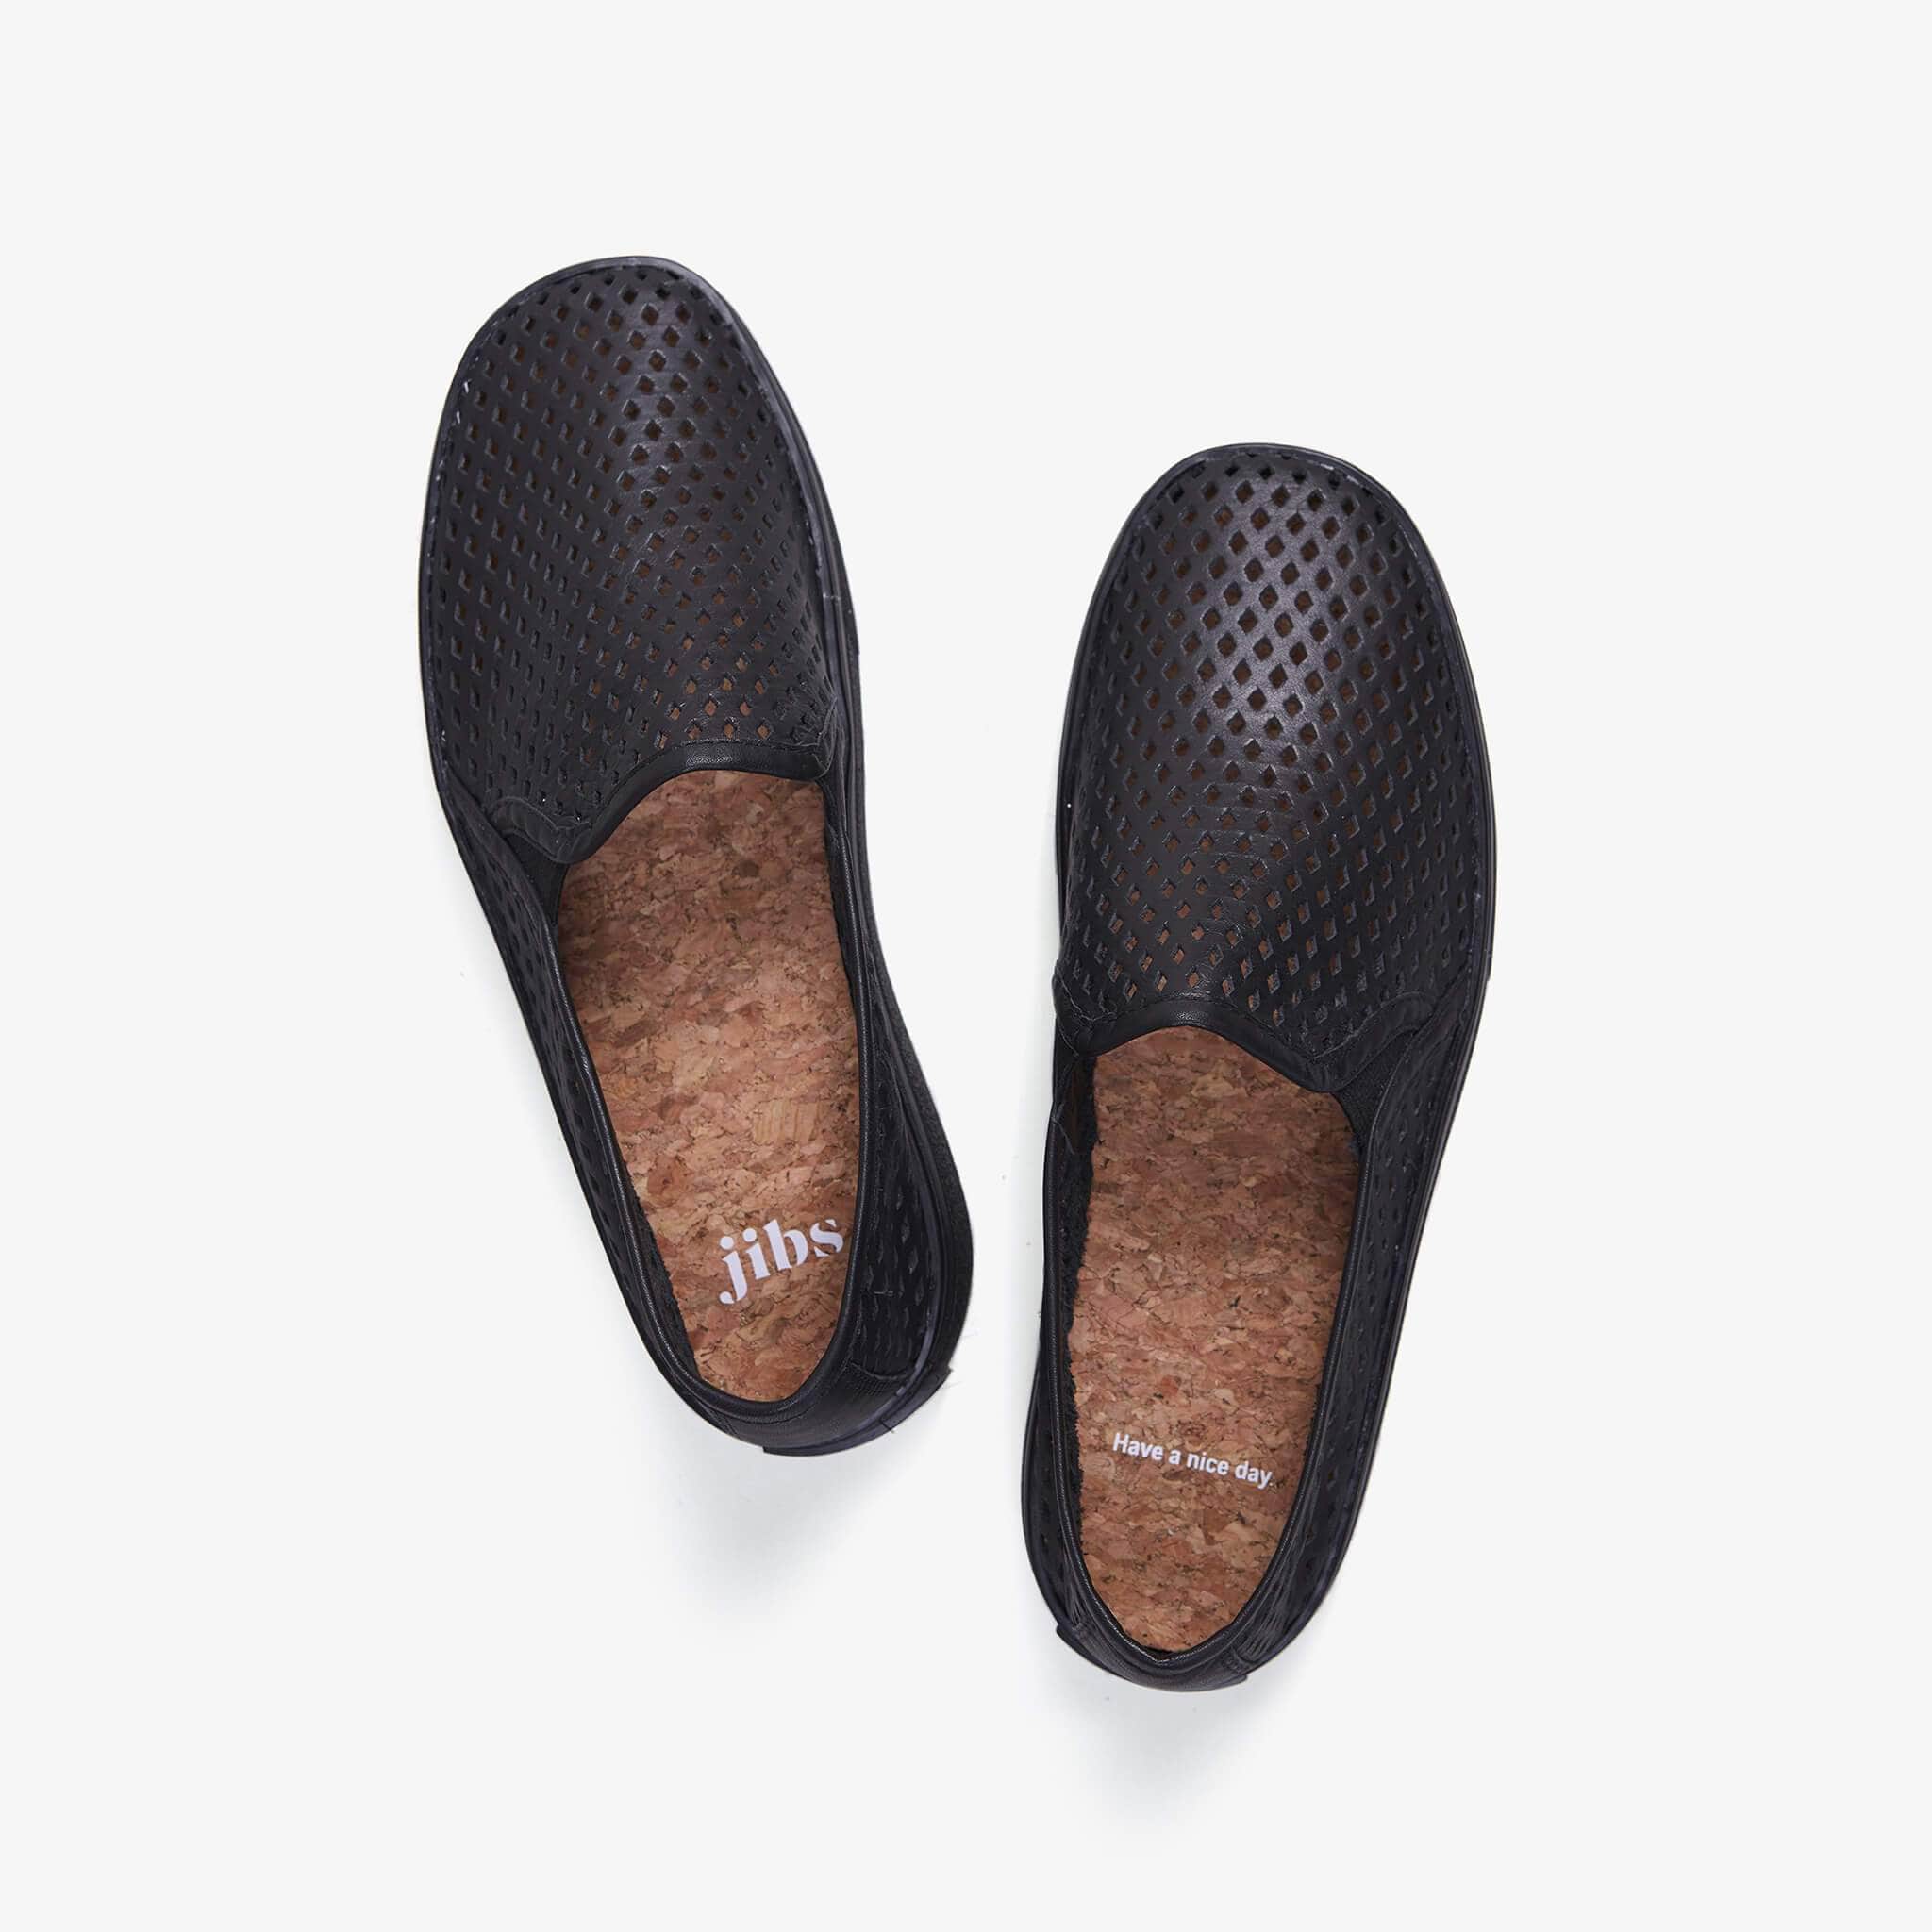 Jibs Classic Jet Black Royale Slip On Sneaker-Shoe Have A Nice Day Cork In-sole